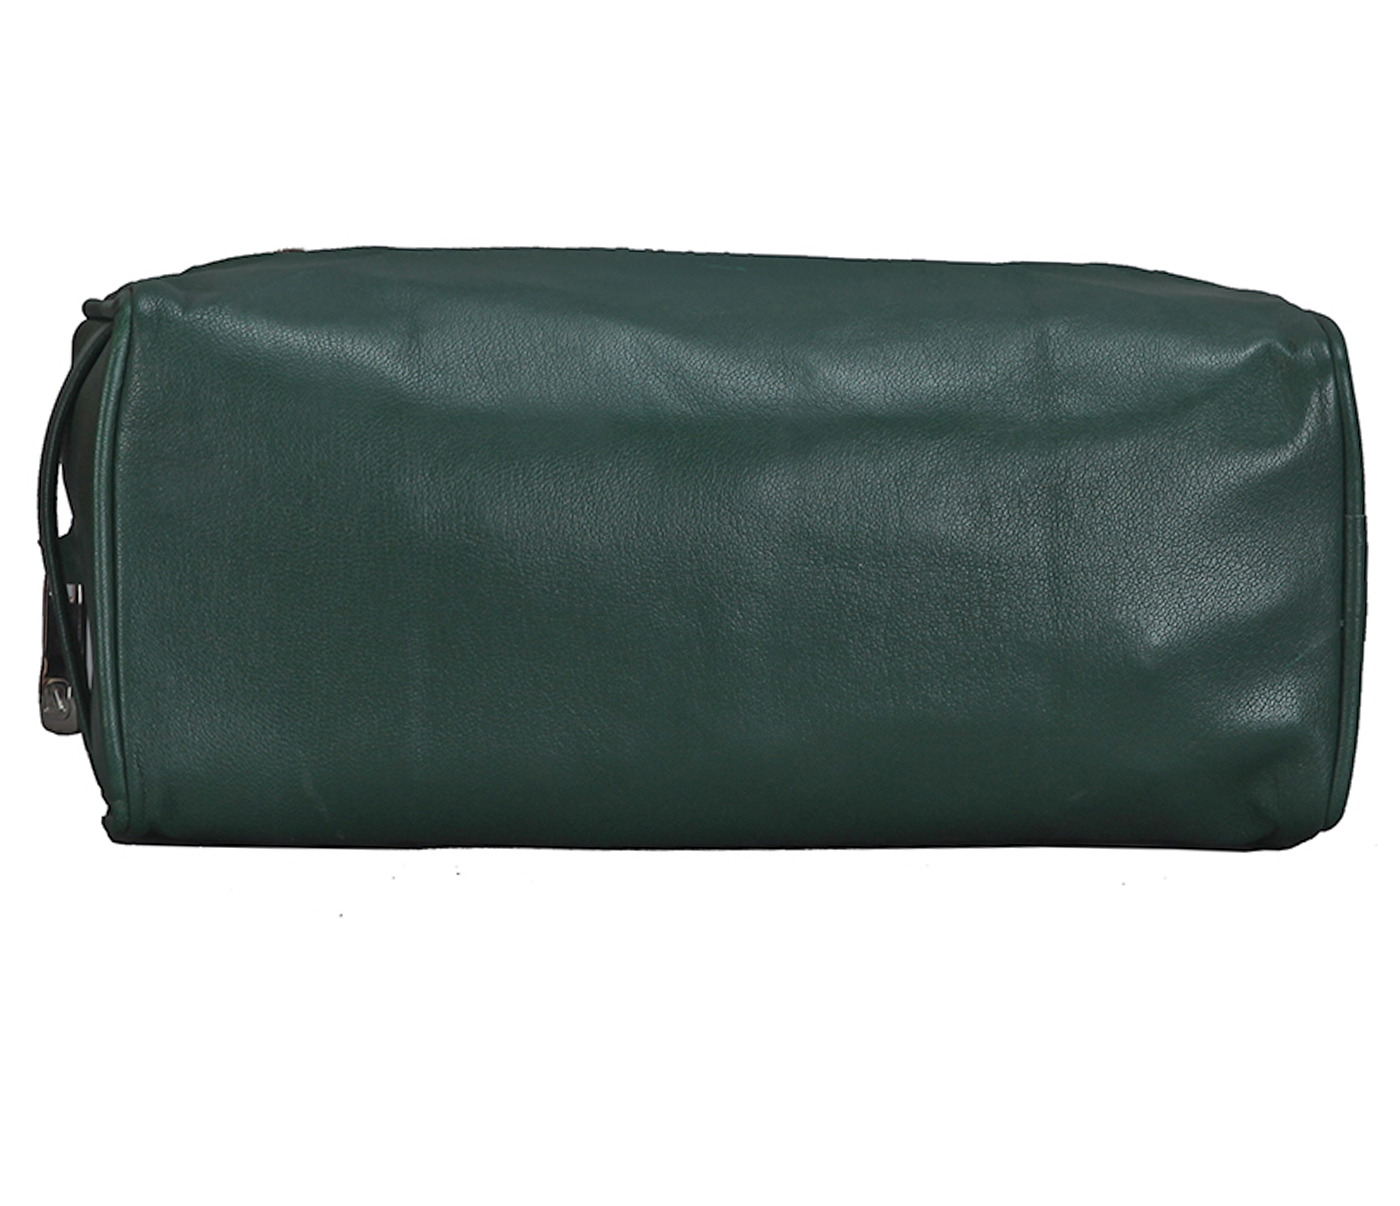 SC1--Unisex Wash And Toiletry Travel Pouch In Genuine Leather - Green